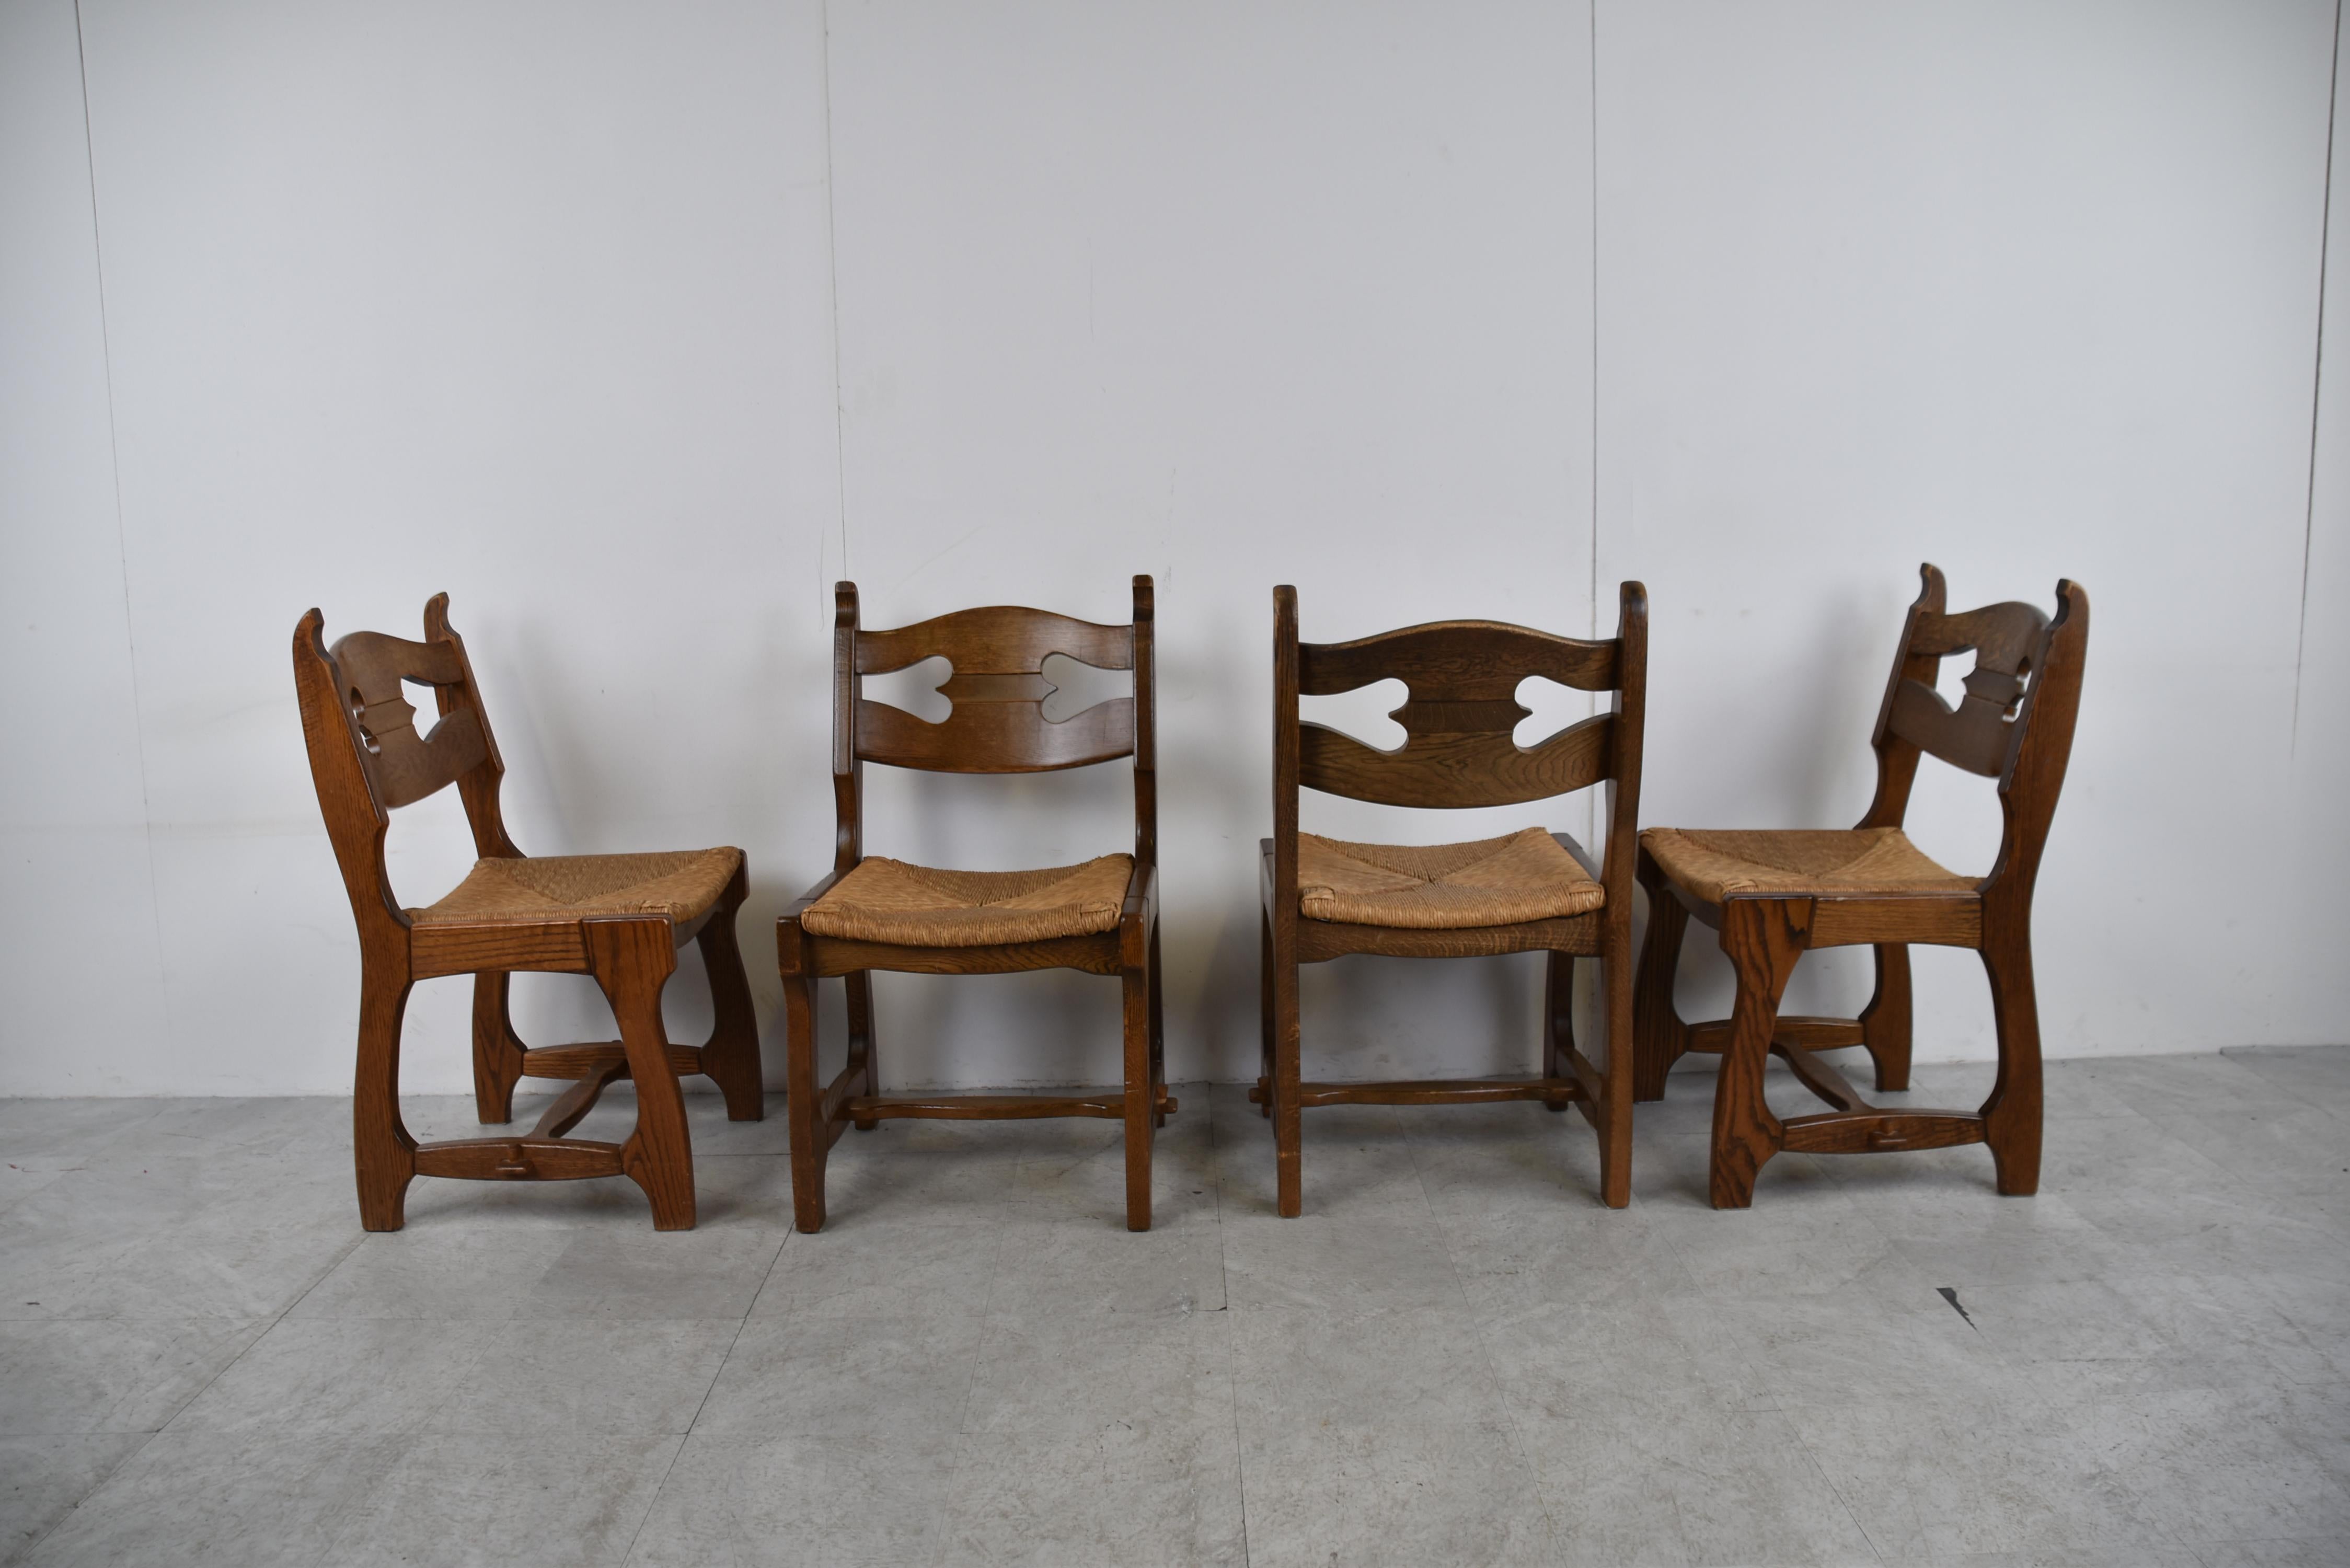 Vintage Oak and Wicker Brutalist Dining Chairs, 1960s For Sale 5